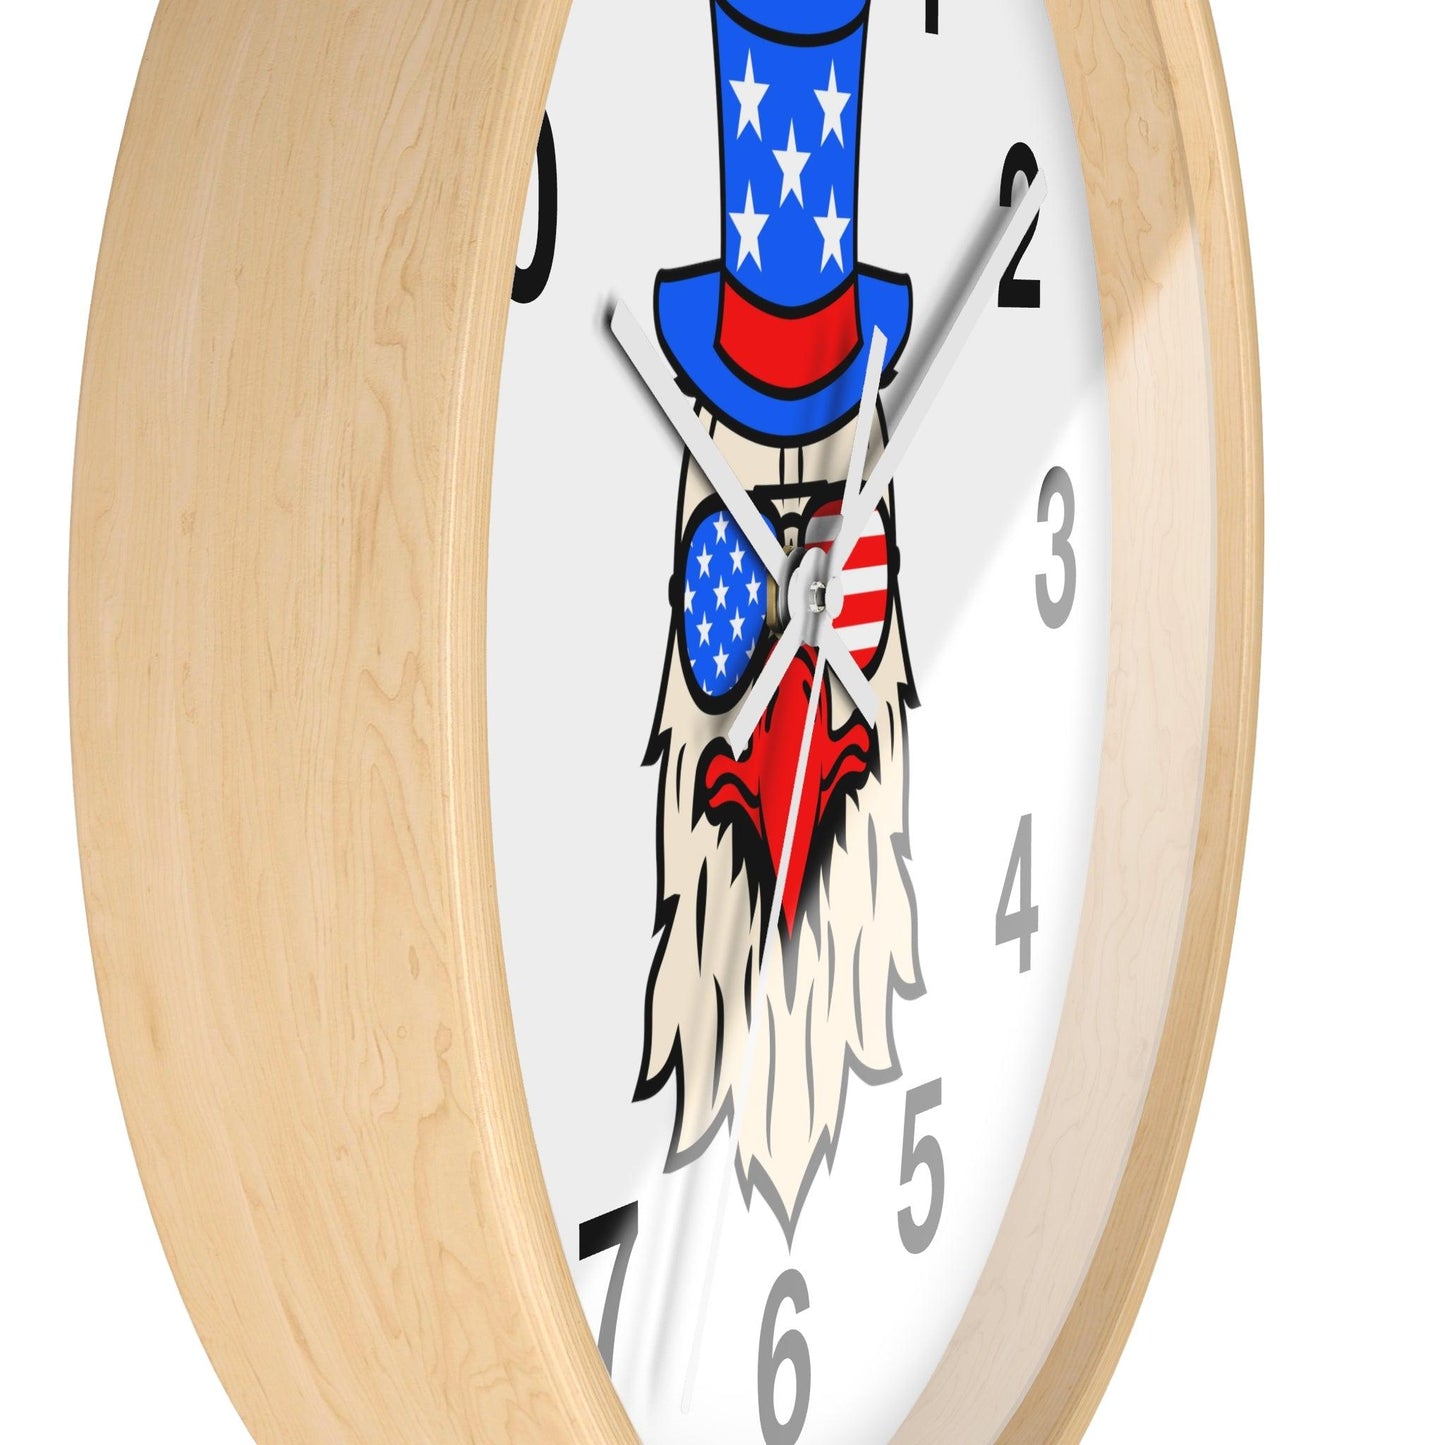 Funny USA Flag Wall Clock, Home decor gift, House Warming gift, New Home Gift, Patriotic gift